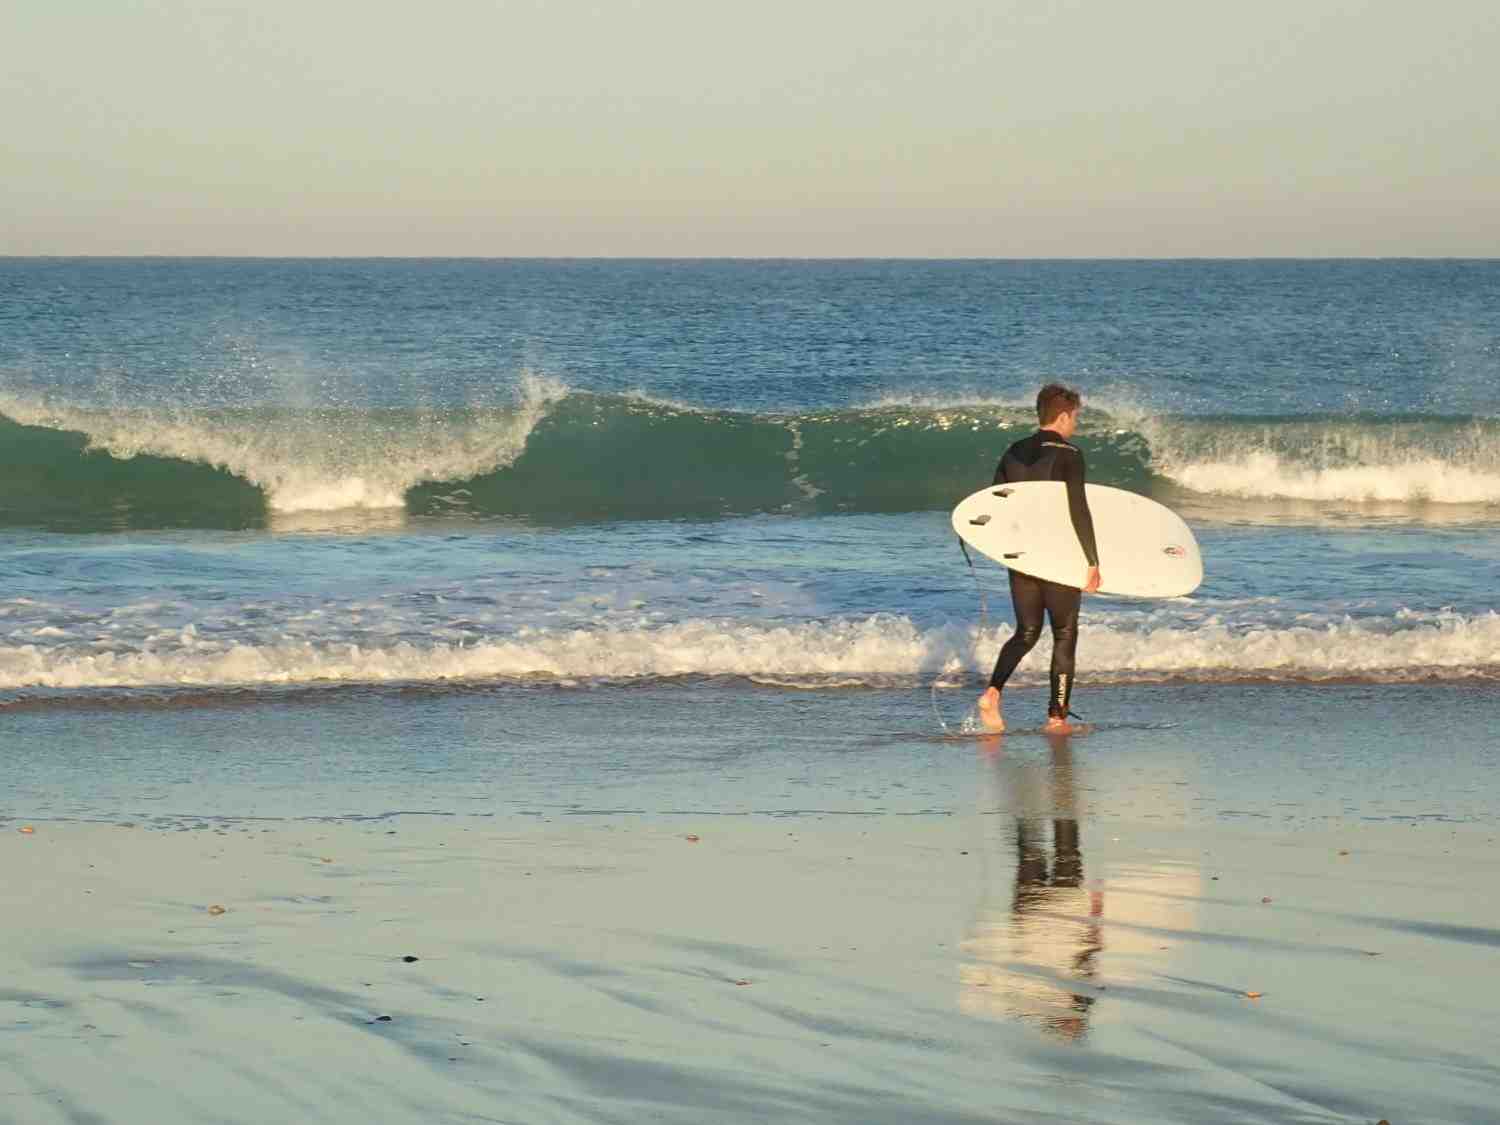 Can you get good at surfing in your 20s?